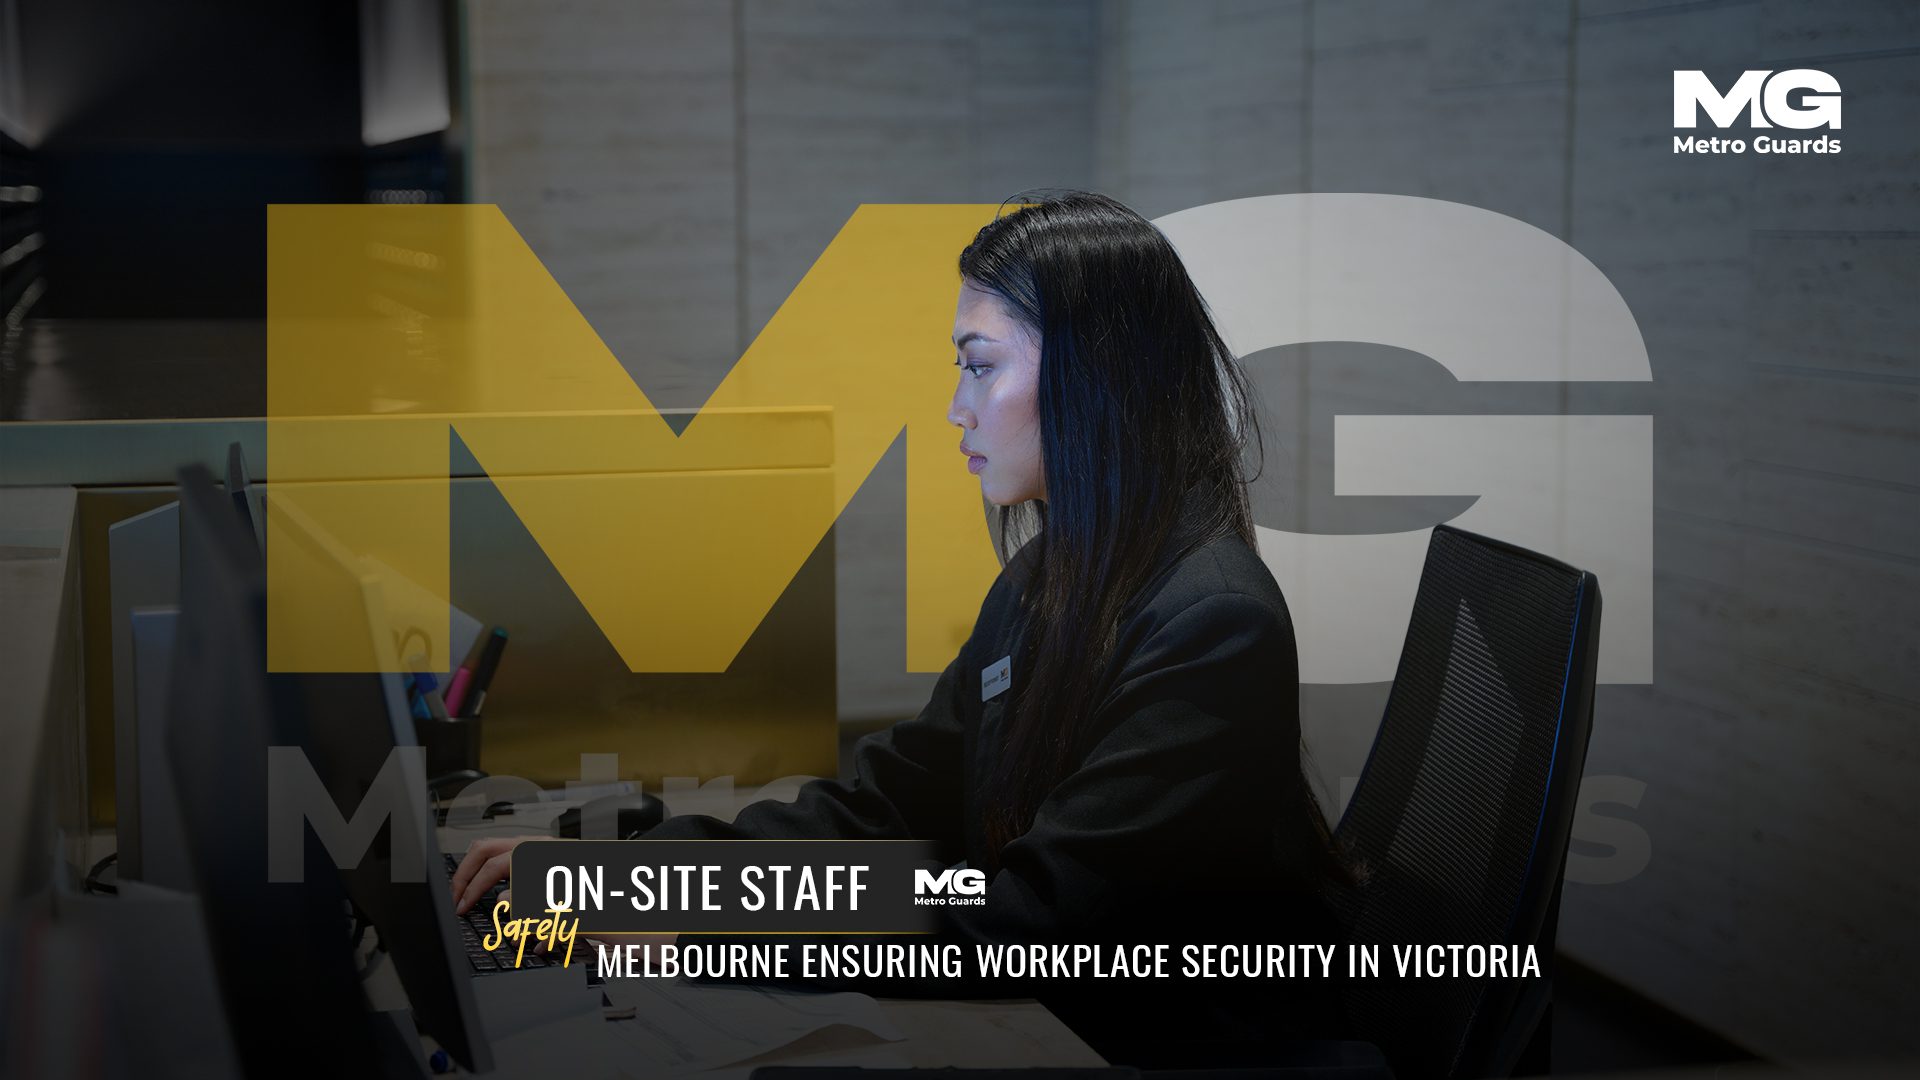 On-site Staff Safety Melbourne: Ensuring Workplace Security in Victoria